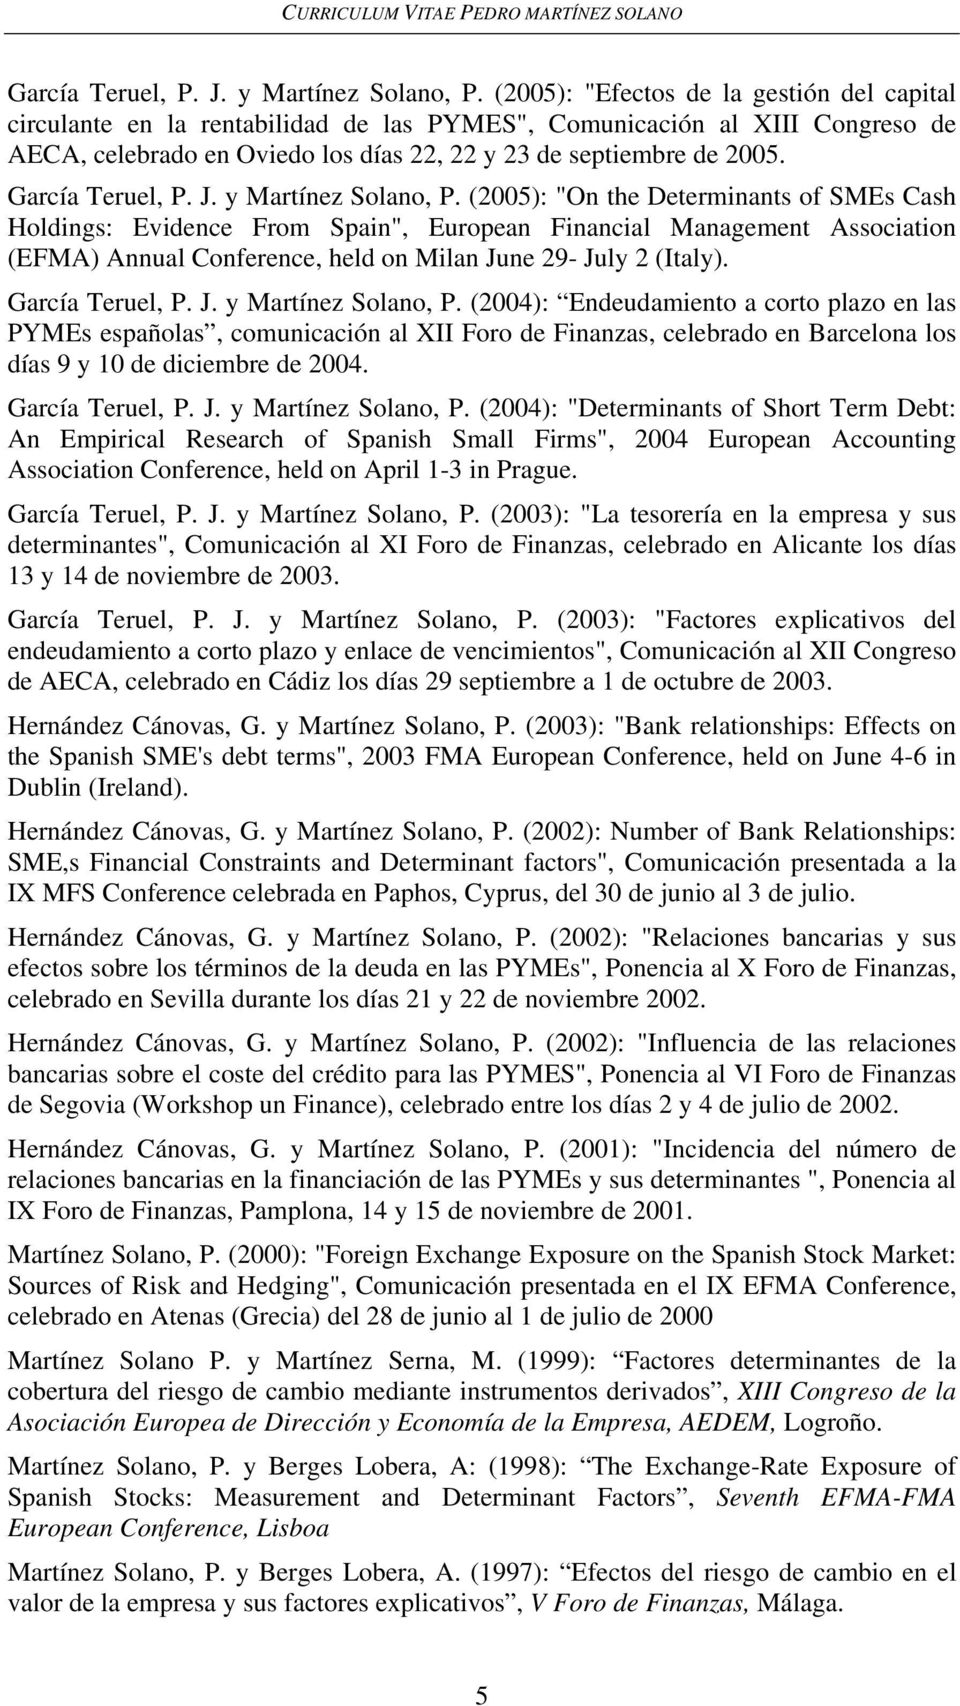 (2005): "On the Determinants of SMEs Cash Holdings: Evidence From Spain", European Financial Management Association (EFMA) Annual Conference, held on Milan June 29- July 2 (Italy).